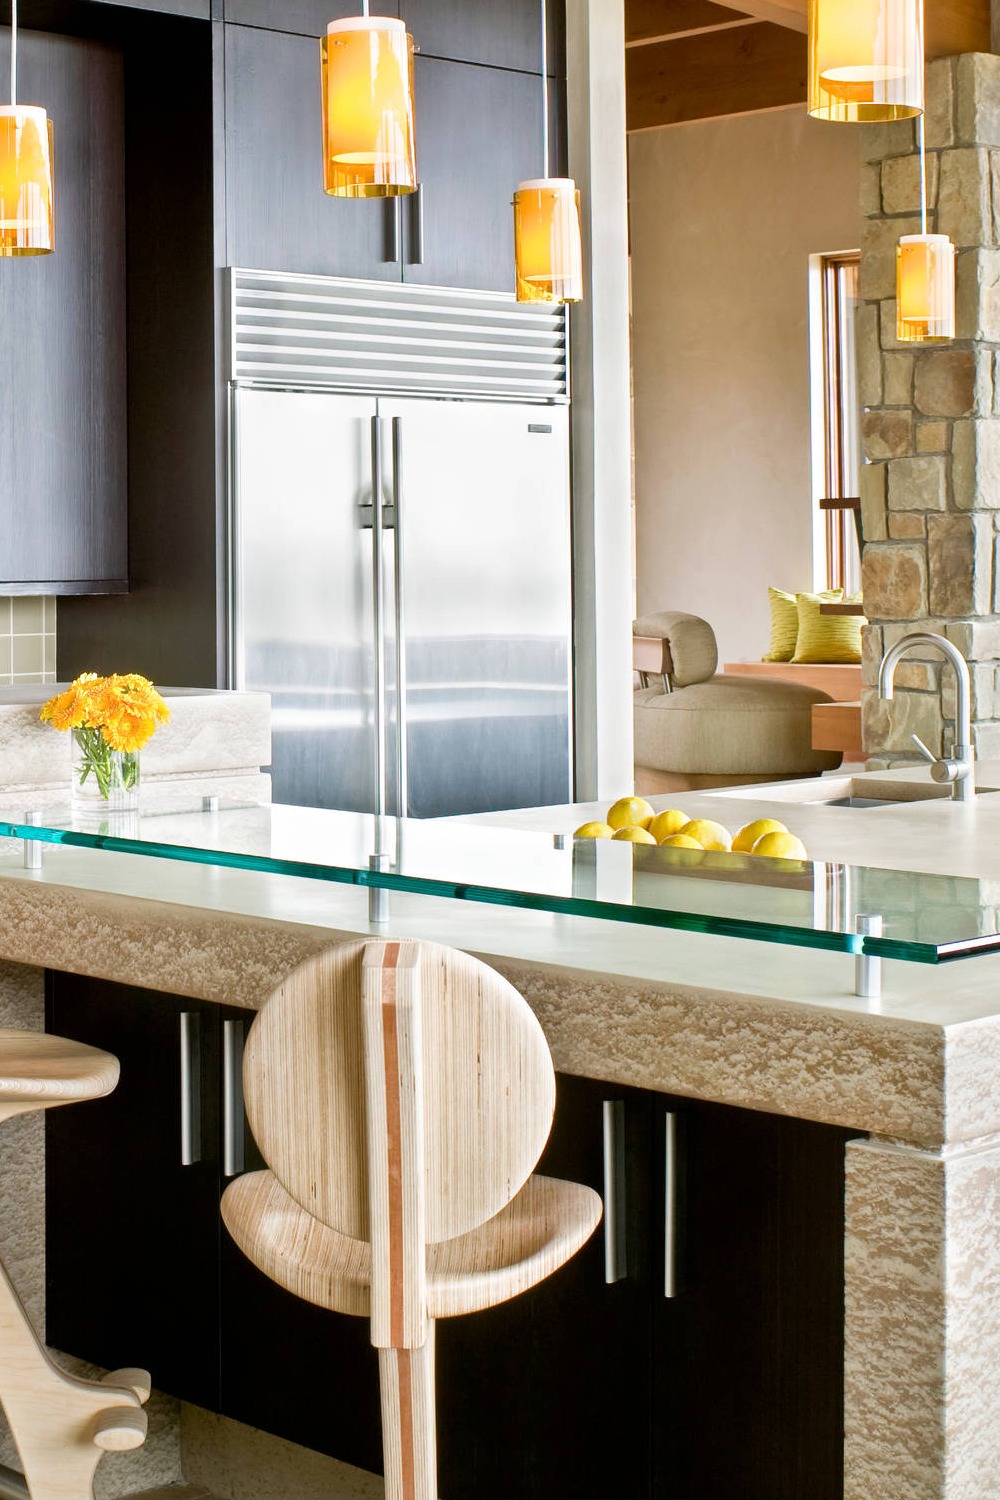 Crushed Glass Countertop Recycled Glass Countertops Tempered Glass Countertop Create Room